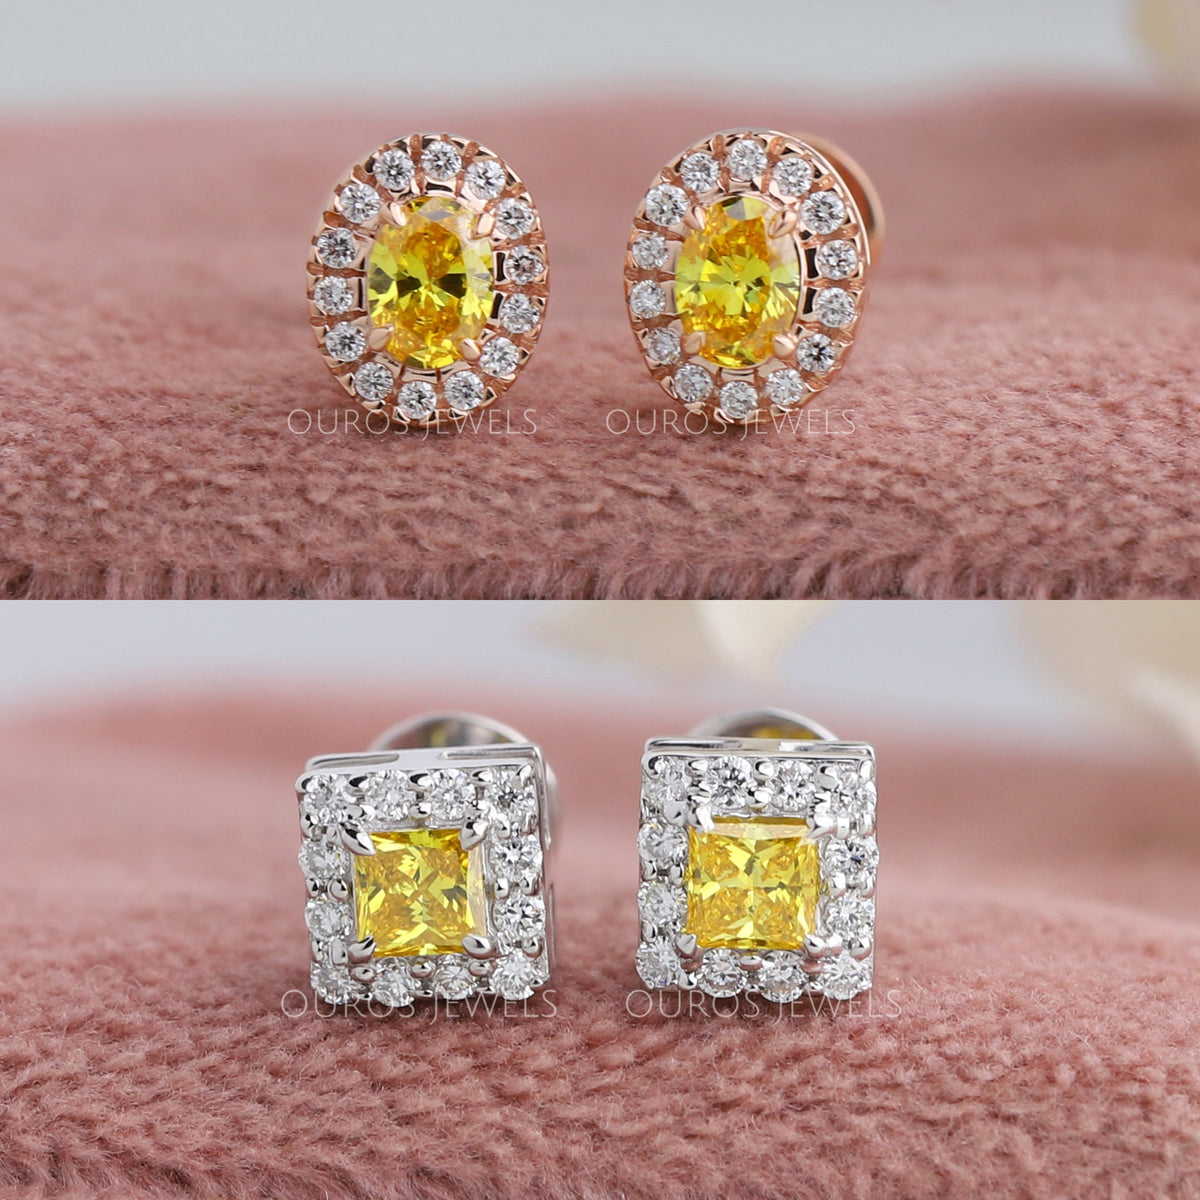 Yellow Diamond Earrings, 14k Solid Yellow Gold Princess-cut Yellow Diamond  Stud Earrings for Women 0.25ctw, SI1-SI2, Bridesmaid Gift - Etsy